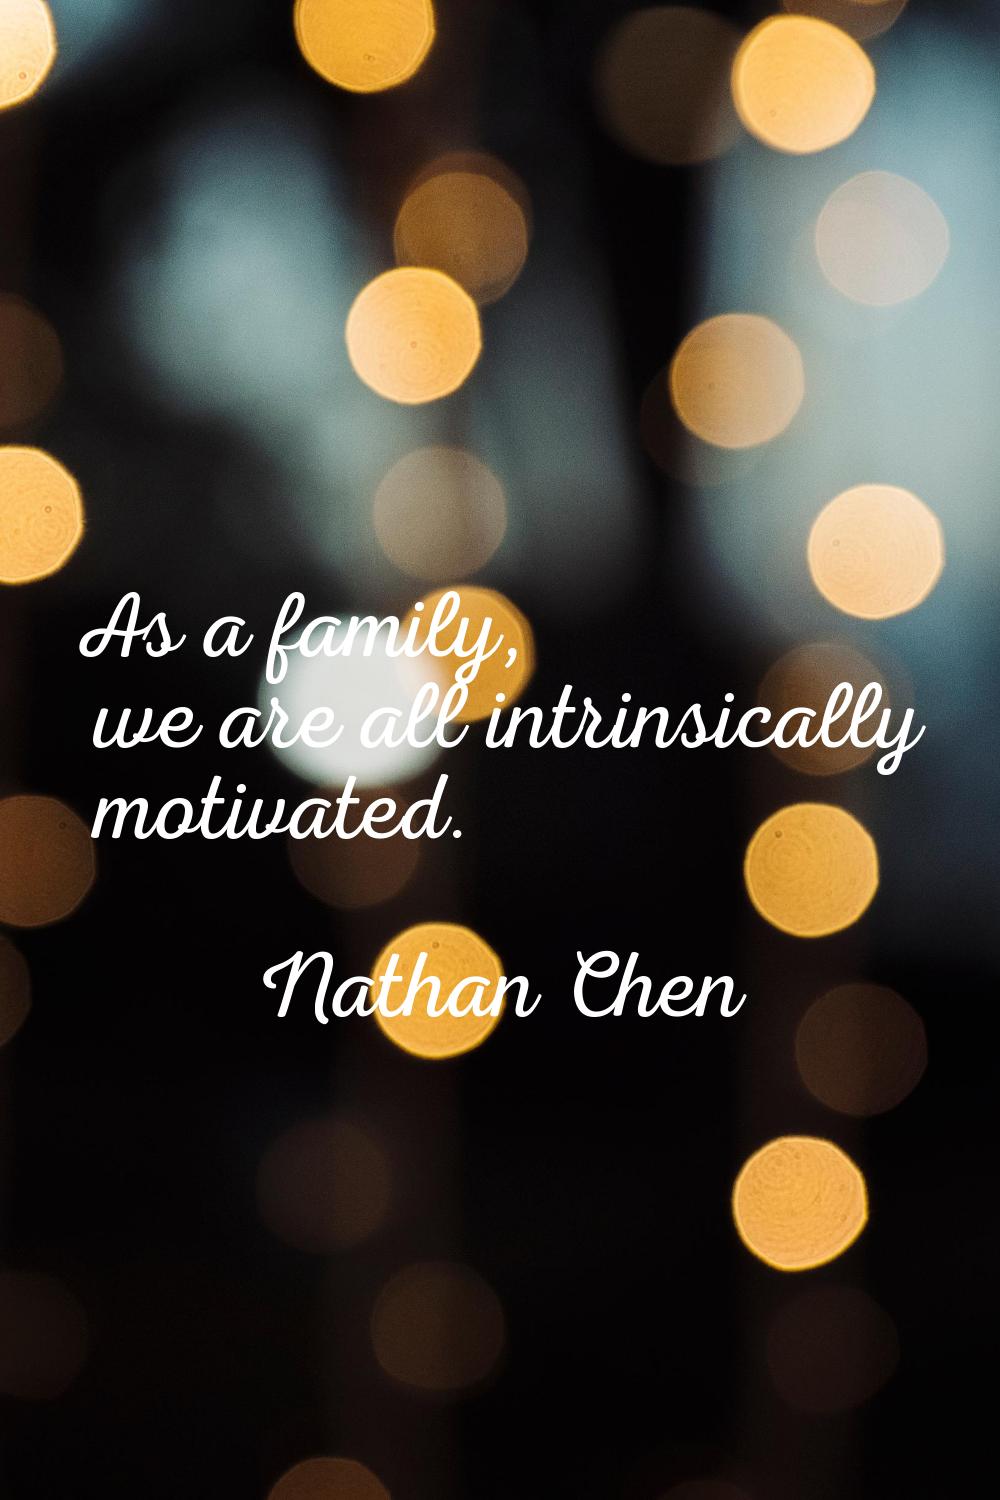 As a family, we are all intrinsically motivated.